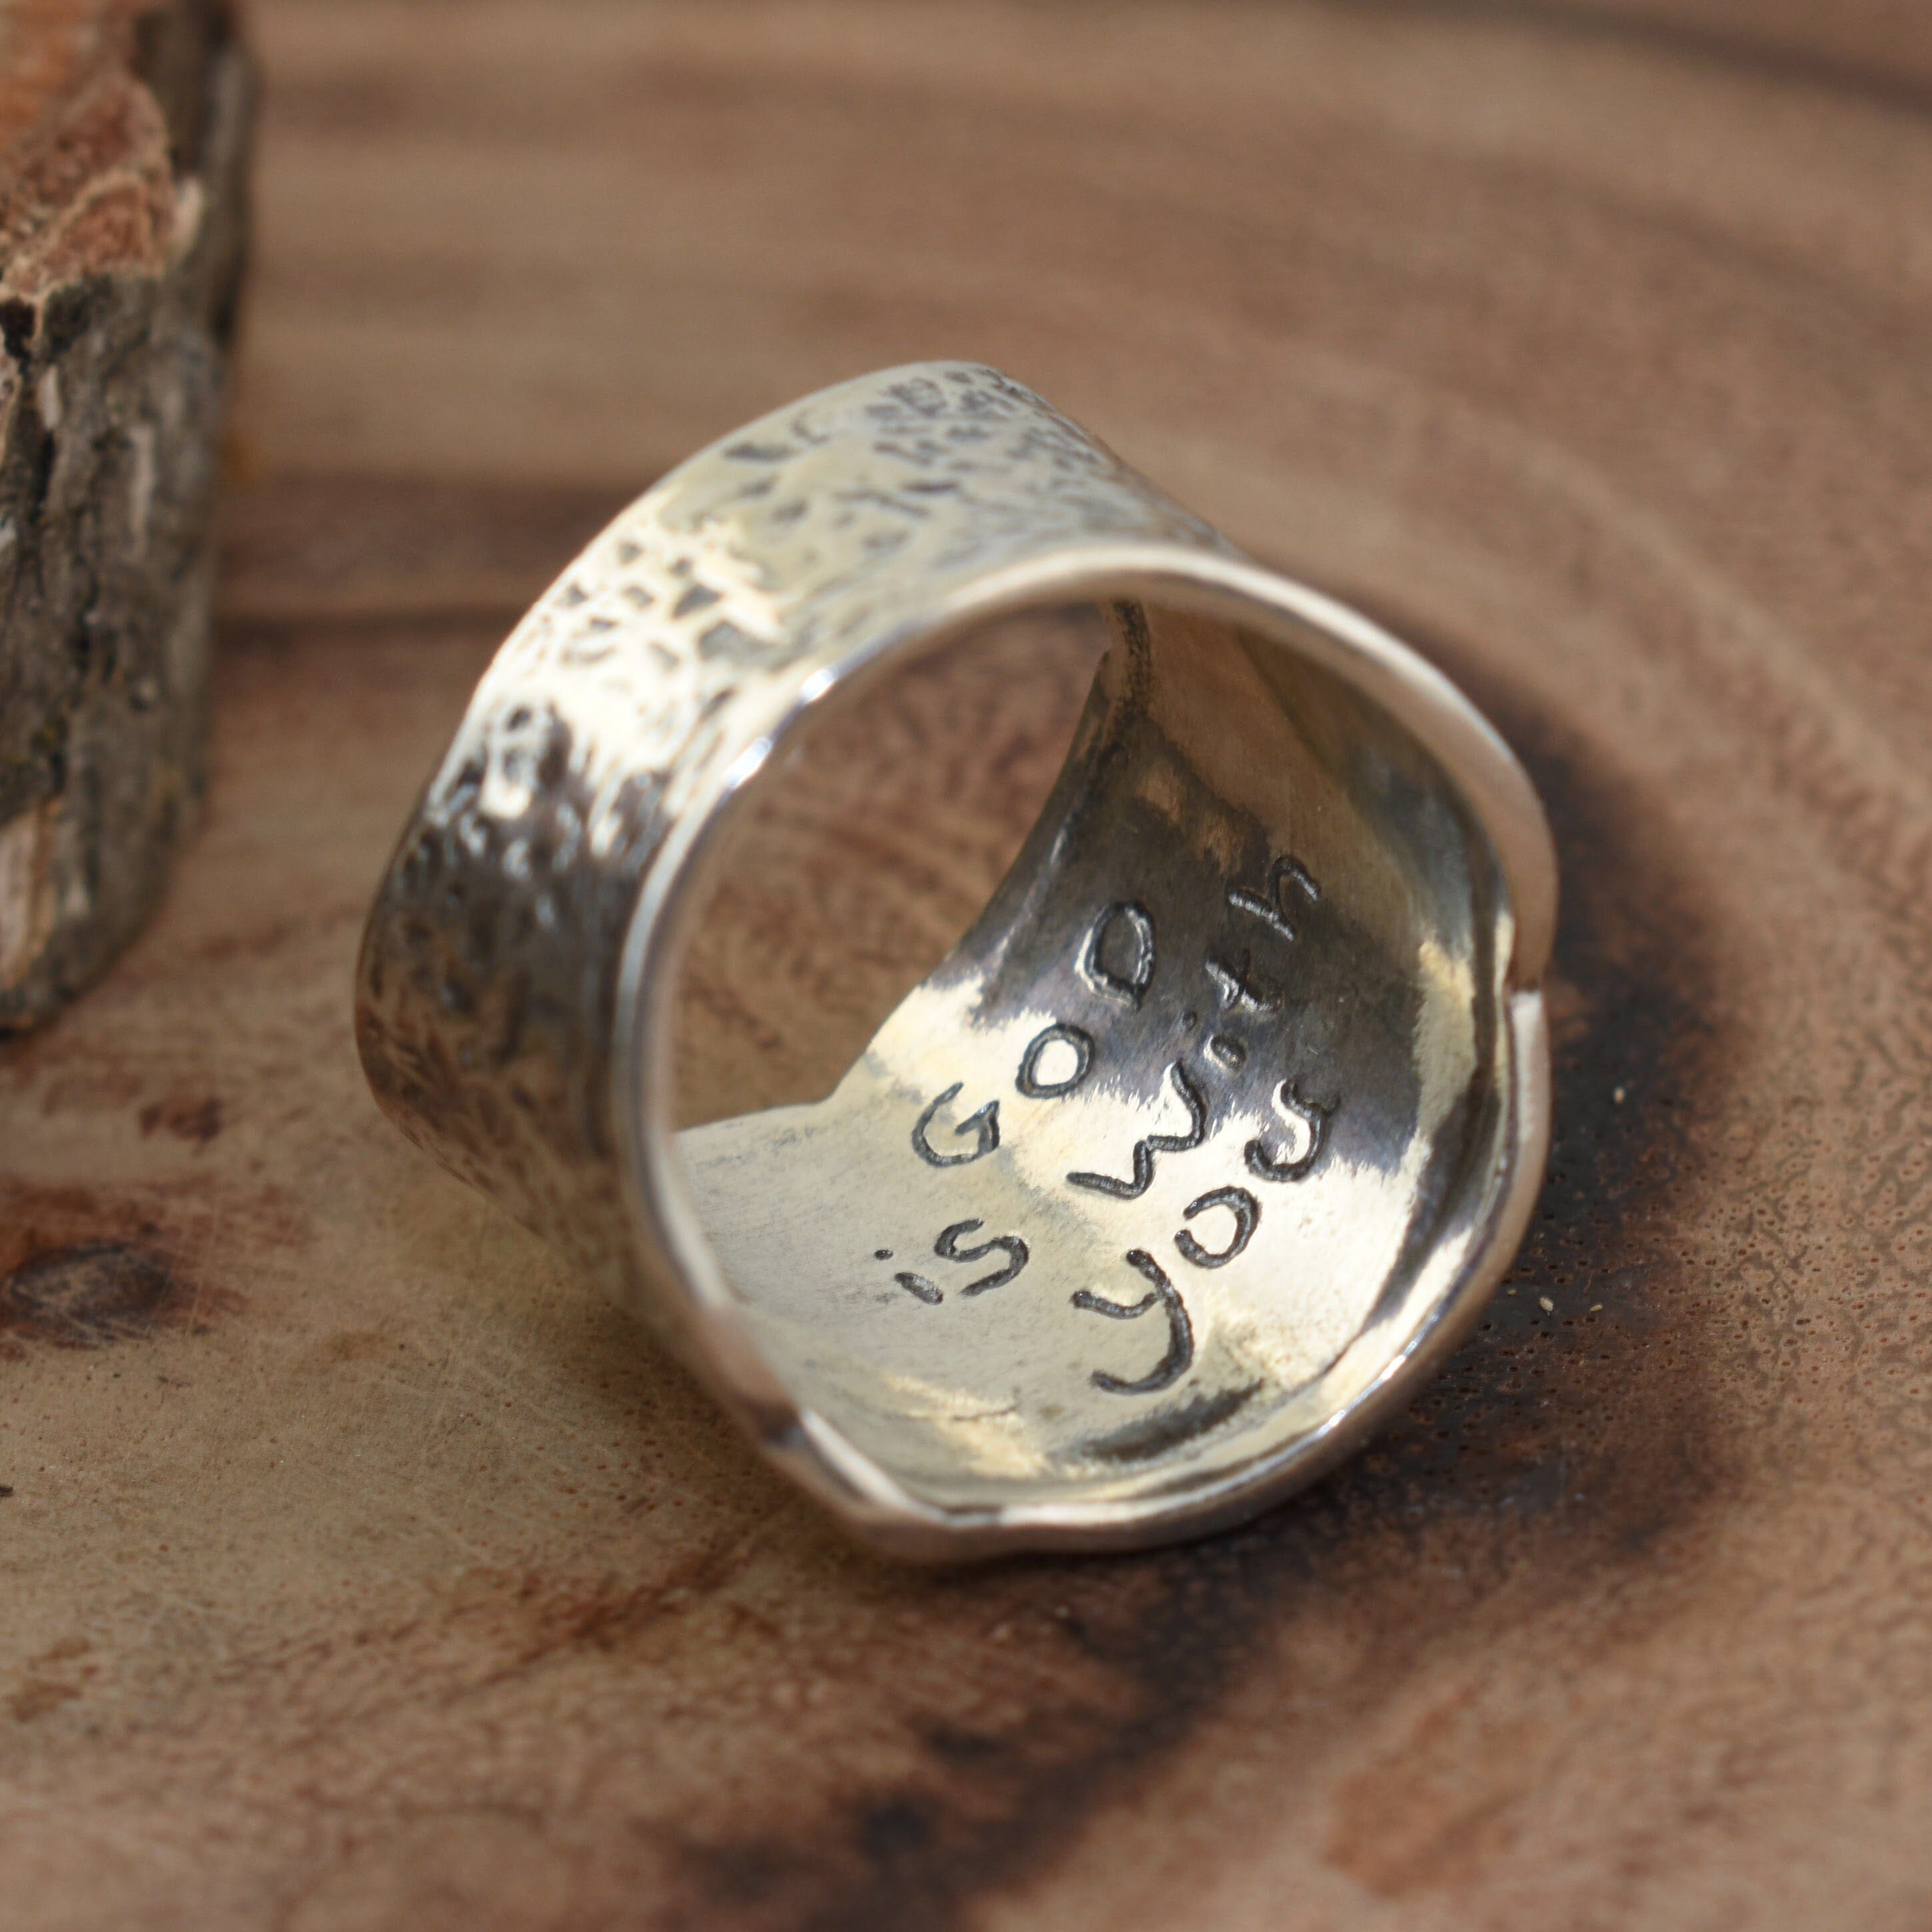 Ring inscribed with "God is with you"